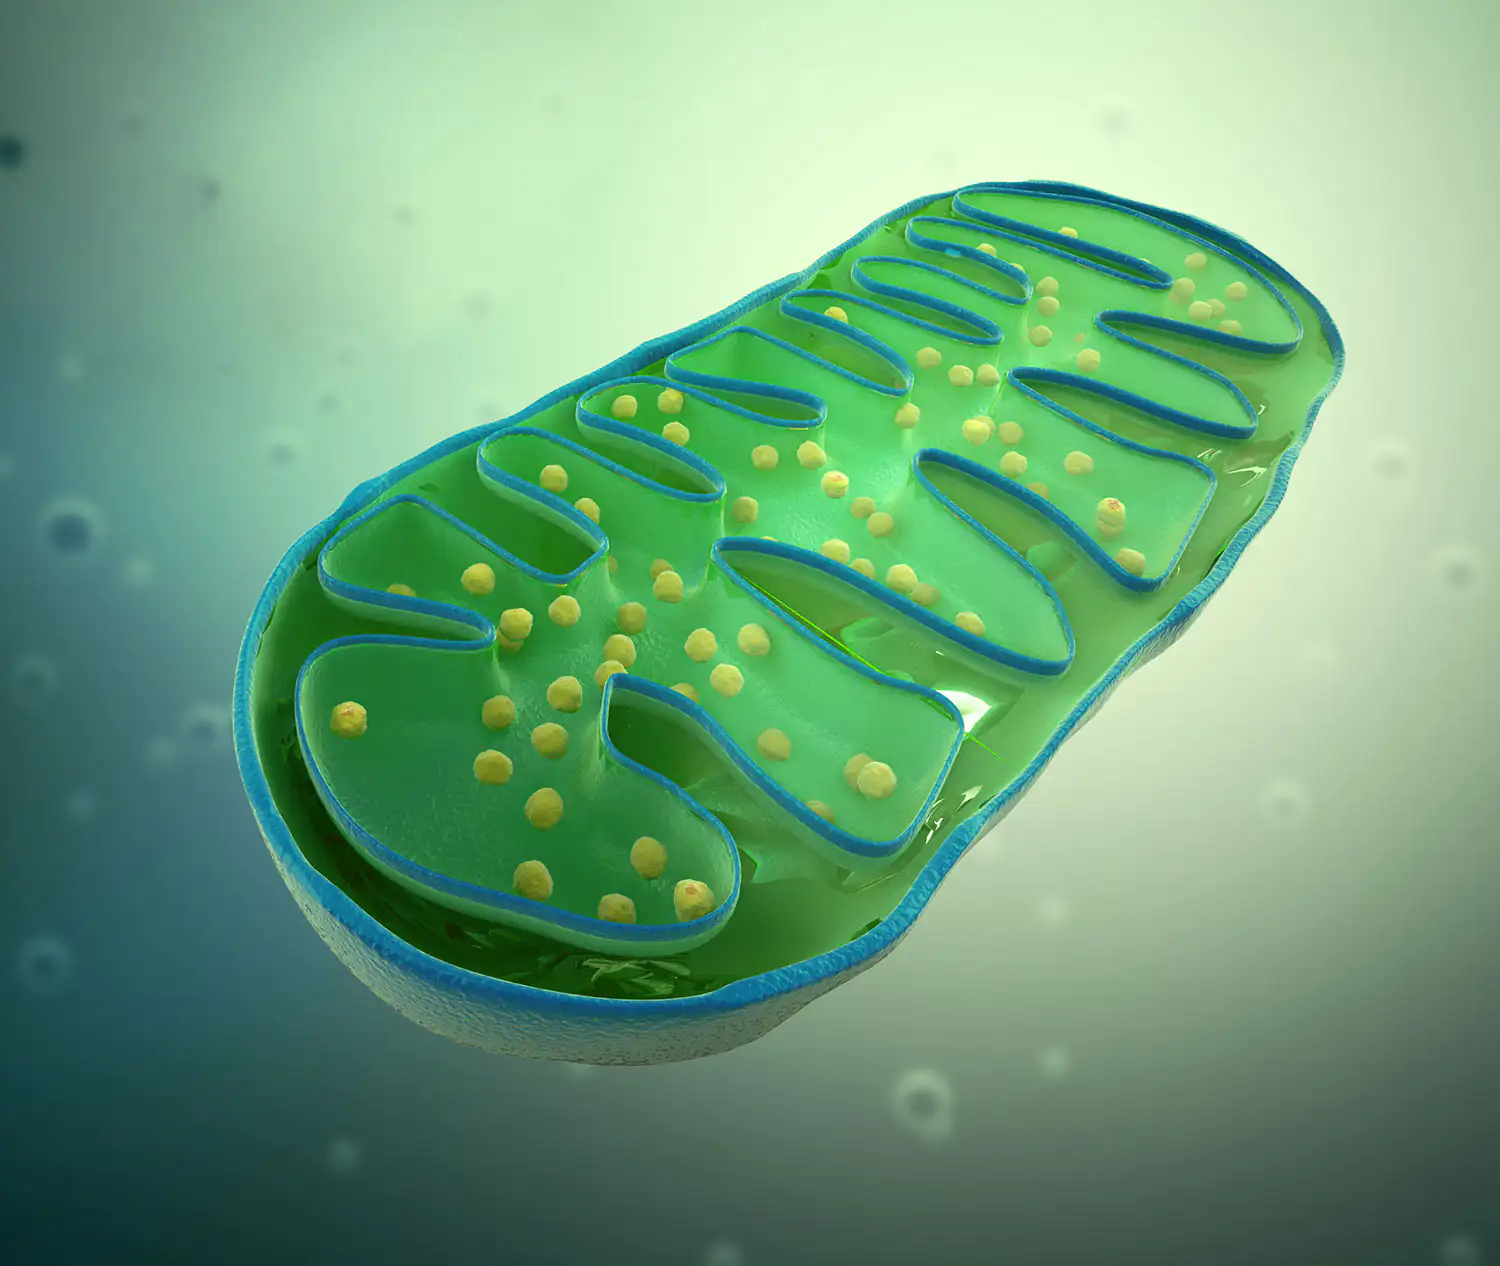 Mitochondrion schematic drawing